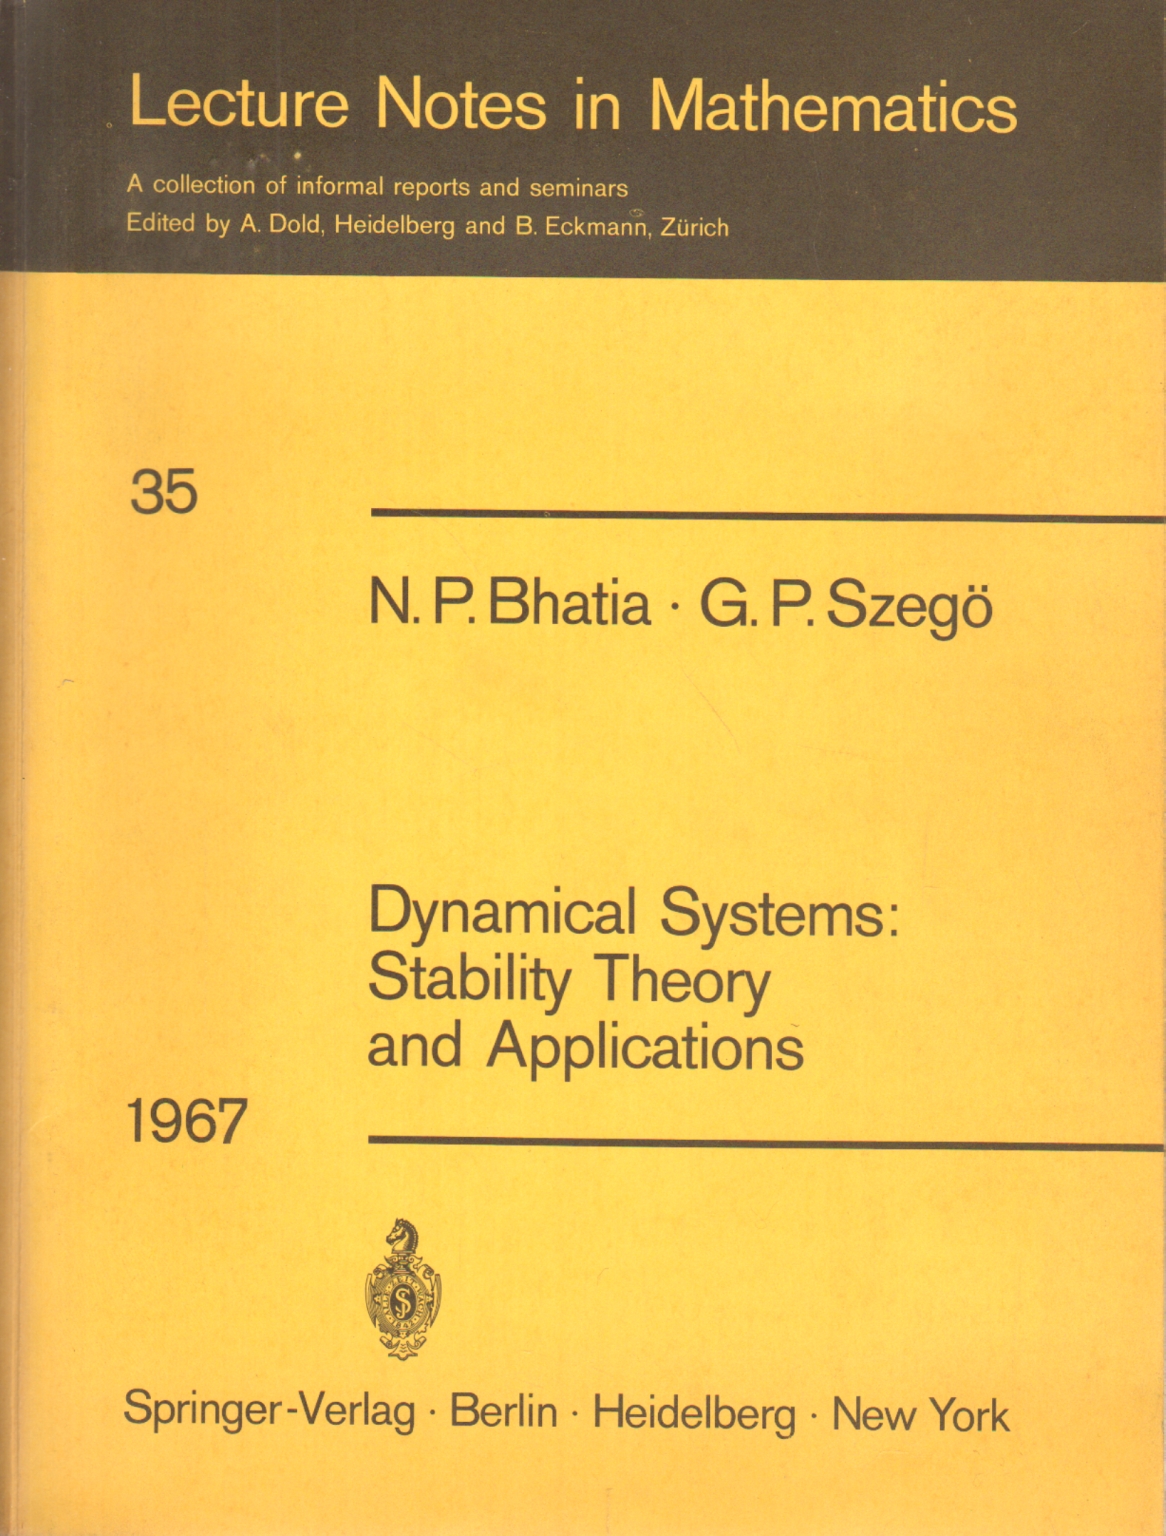 Dynamical systems: stability theory and applications